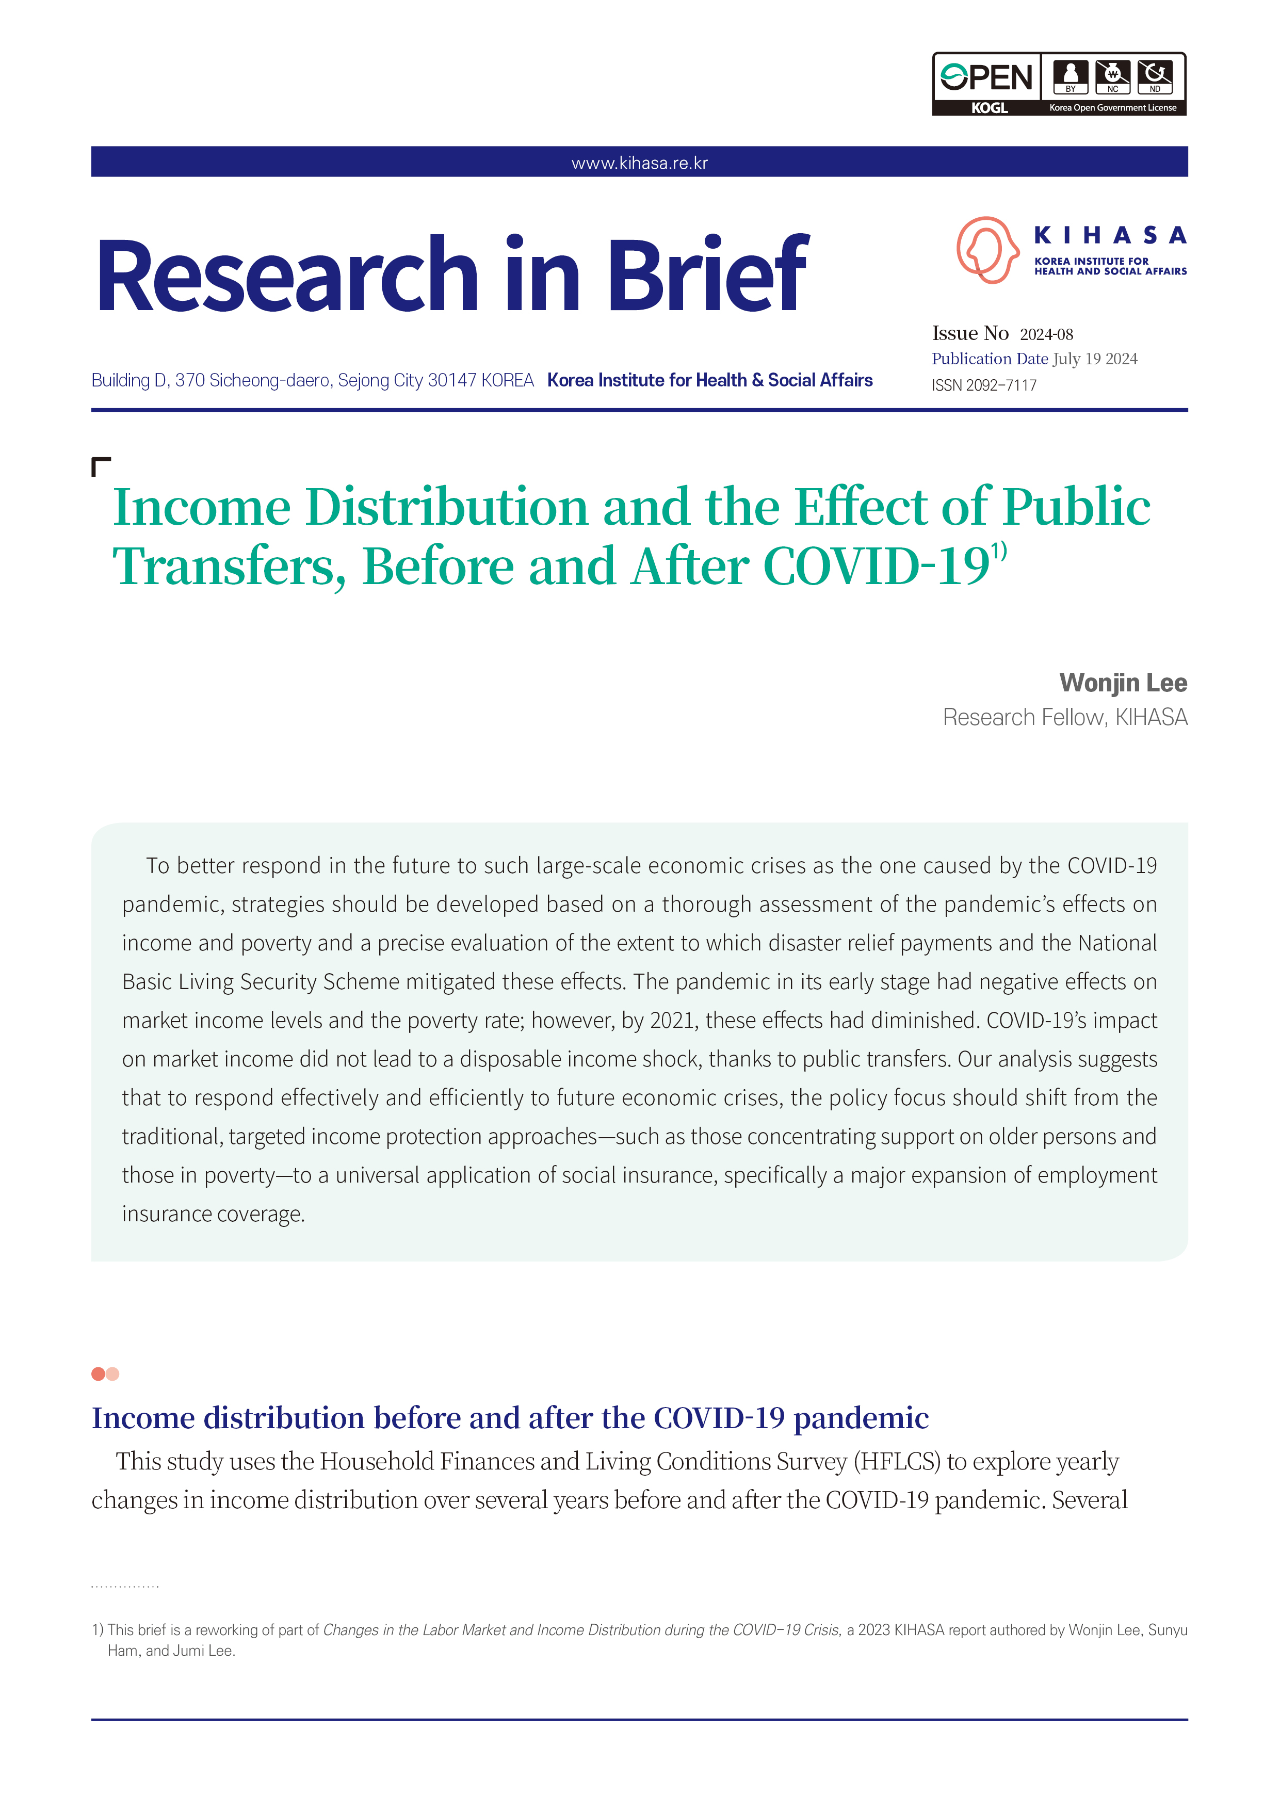 Income Distribution and the Effect of Public Transfers, Before and After COVID-19